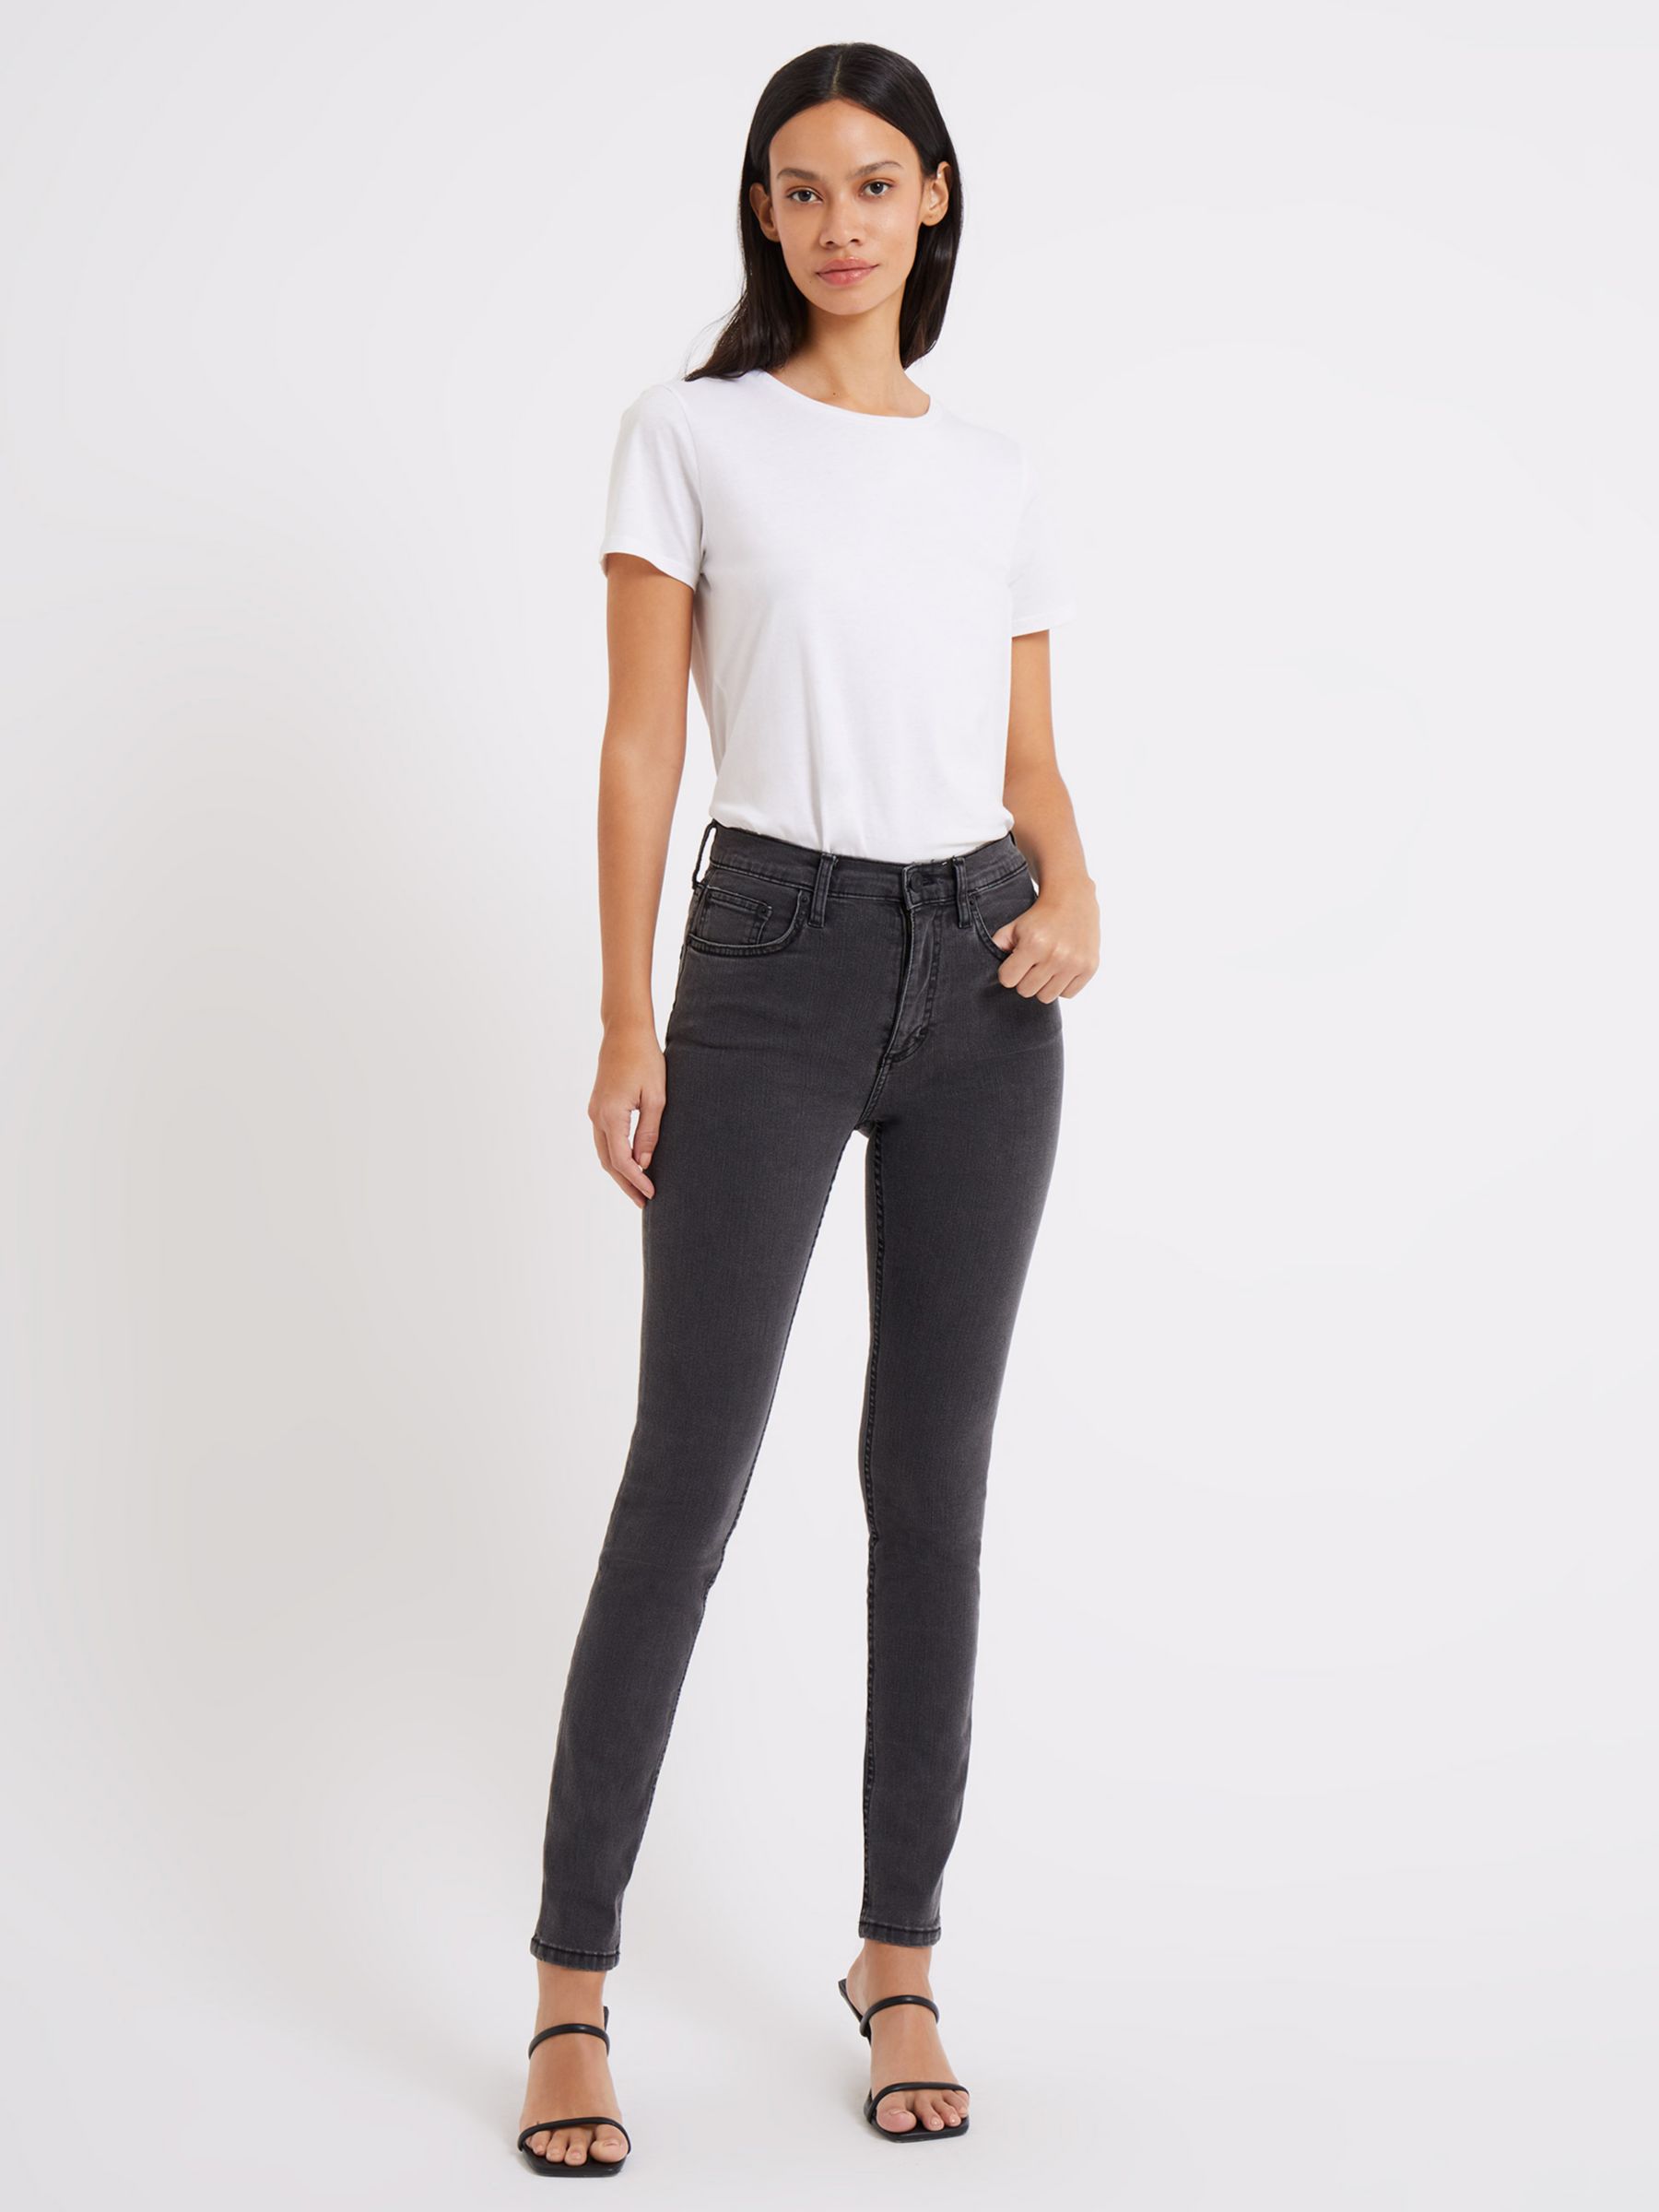 French Connection Rebound Response Skinny Jeans, Charcoal, 6